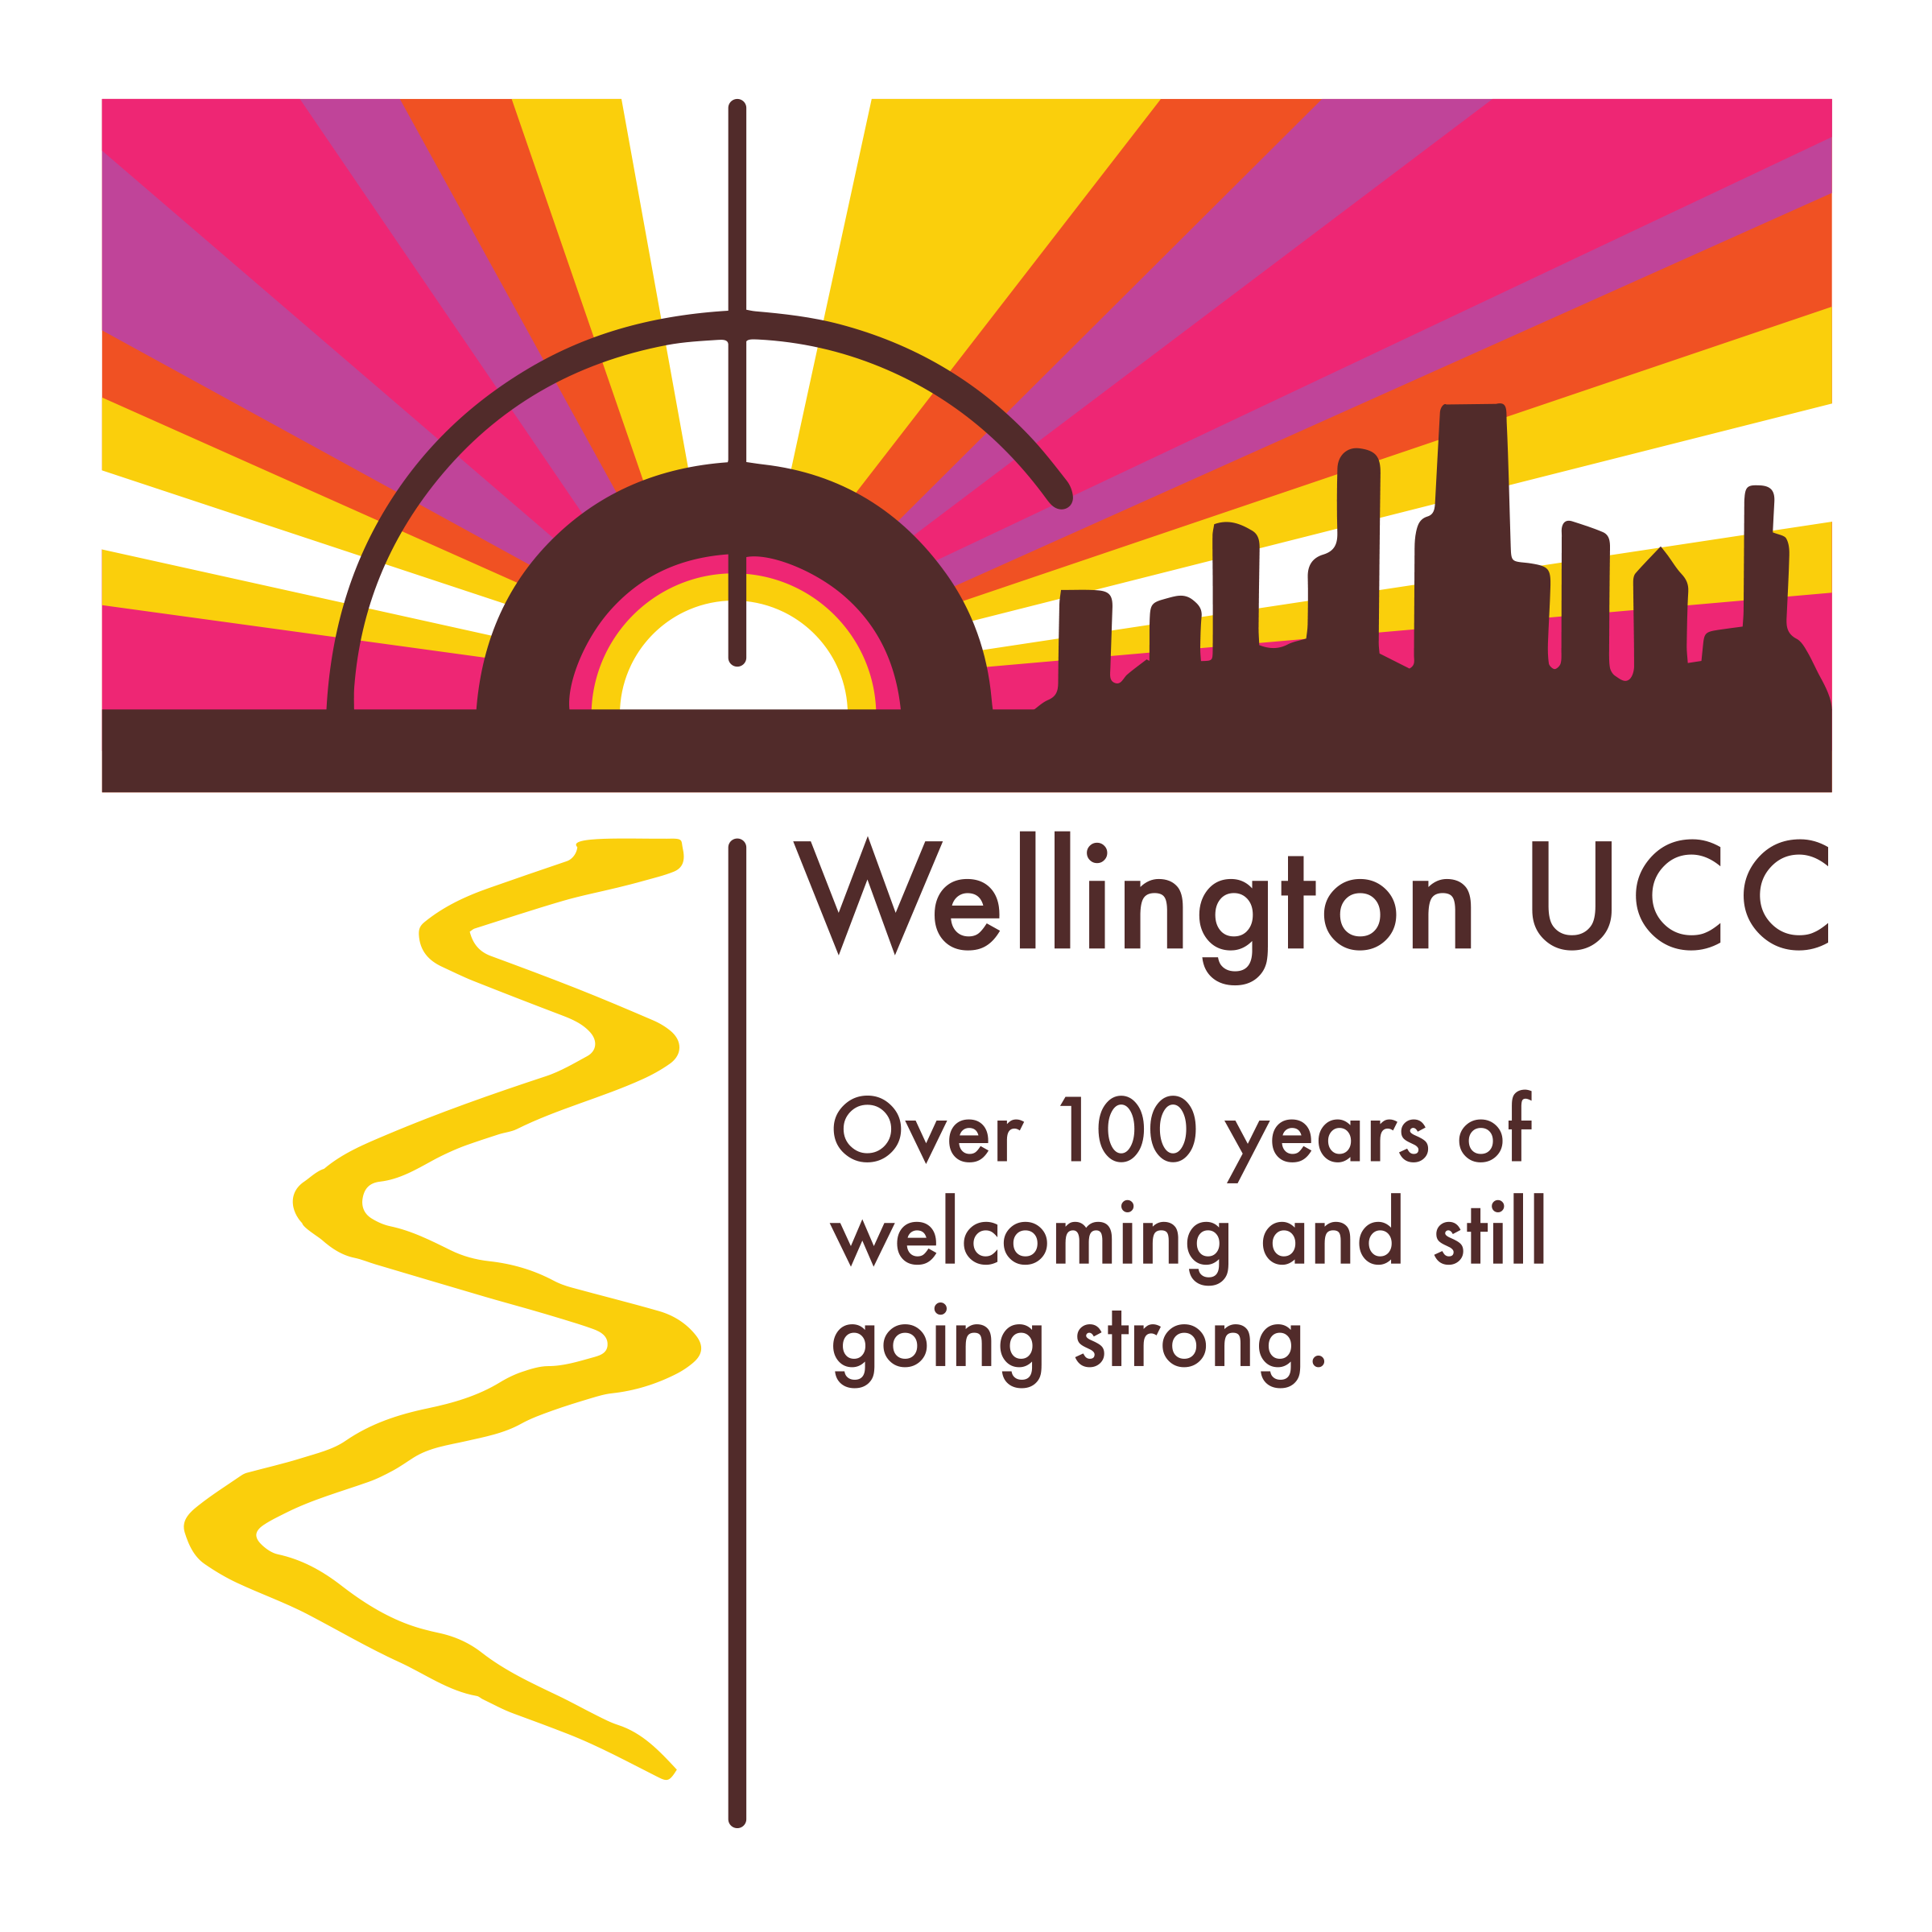 Wellington UCC logo. Over 100 years of welcoming and still going strong.